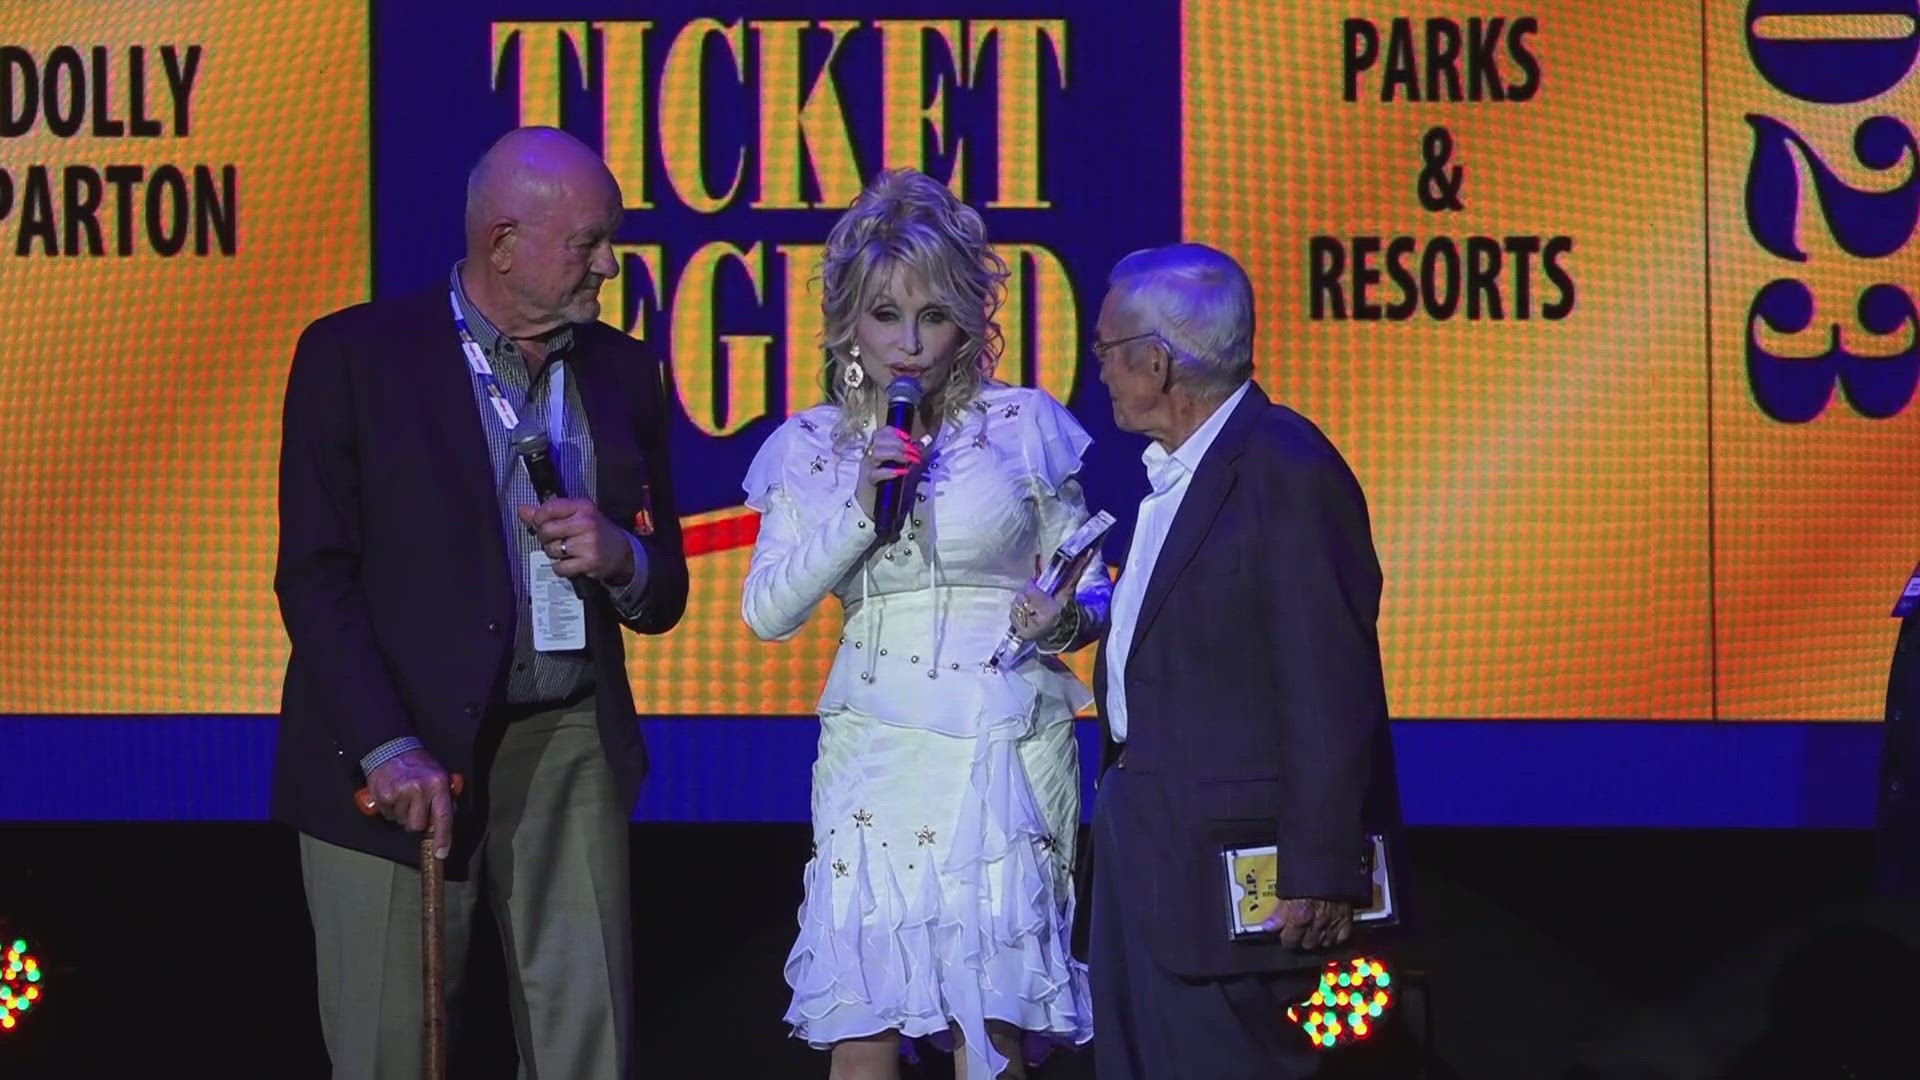 Dolly Parton won the Golden Ticket Legend award along with her two amusement park business partners who helped her open Dollywood back in the 1980s.